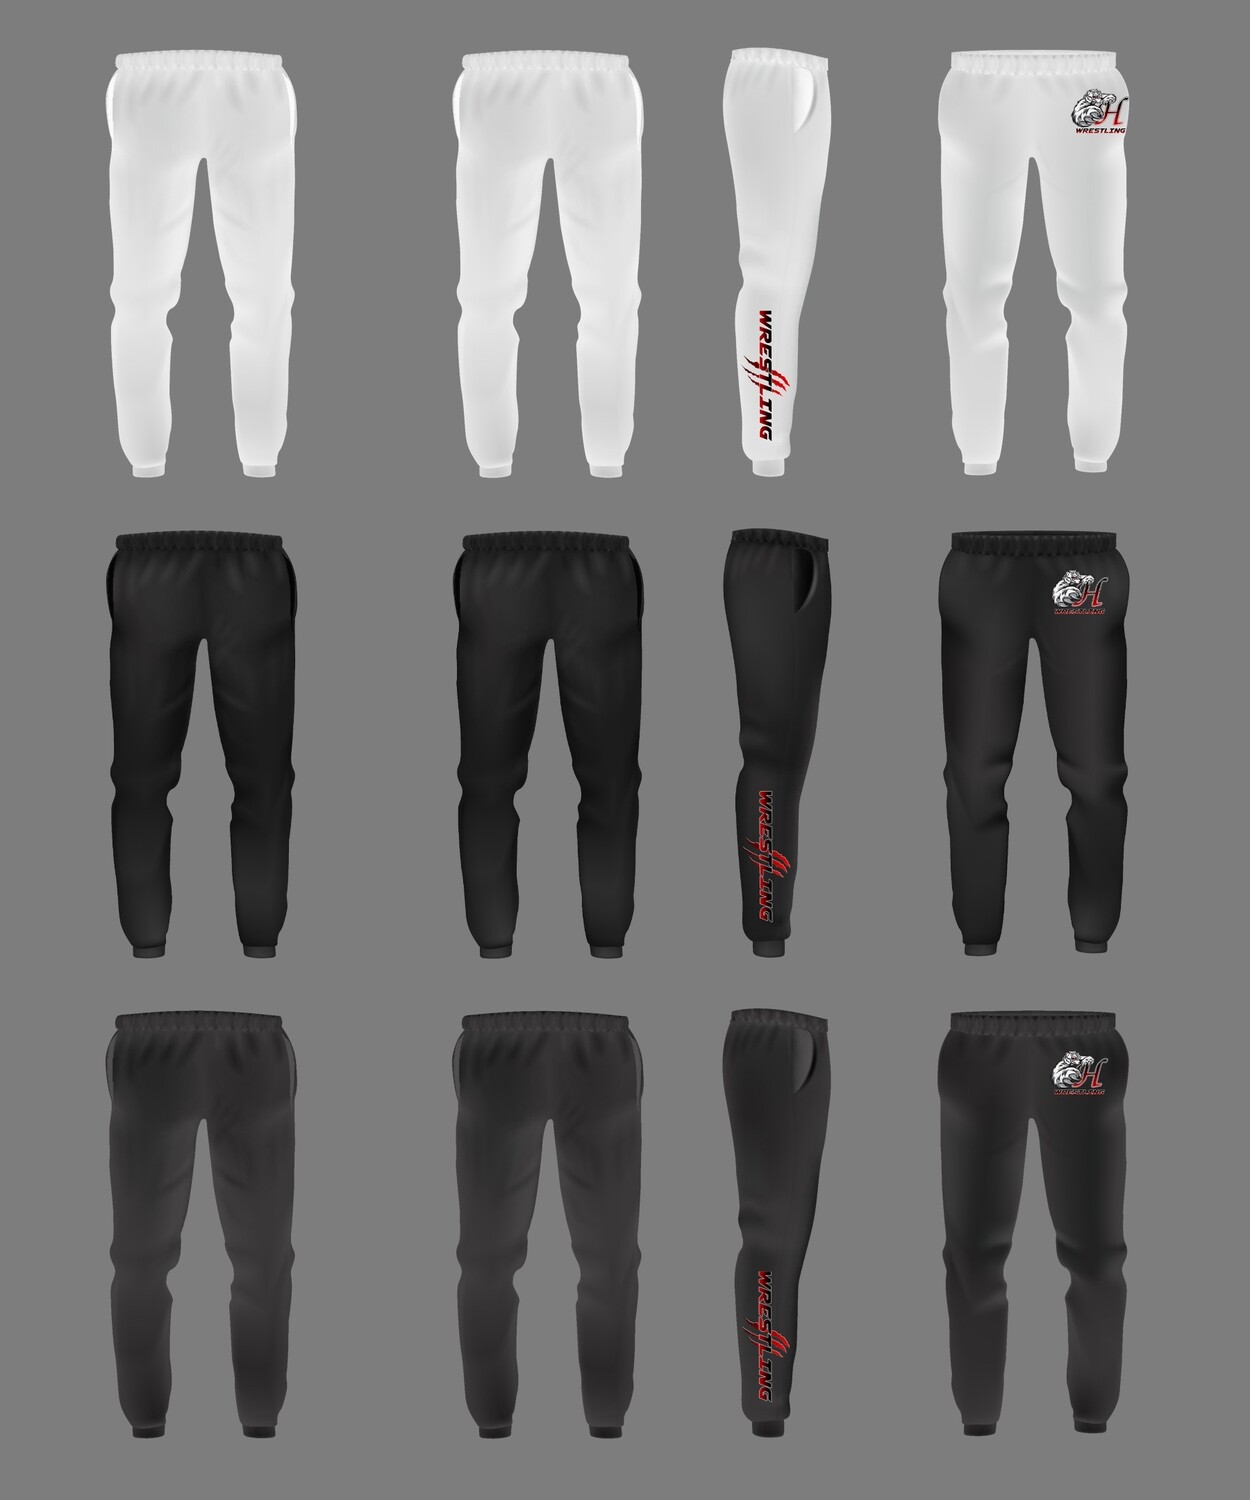 Jerzees Nublend Fleece Cuffed Sweat Pants,
Mens & Unisex Sizes
Front Graphic Included,
Mix & Match Graphics